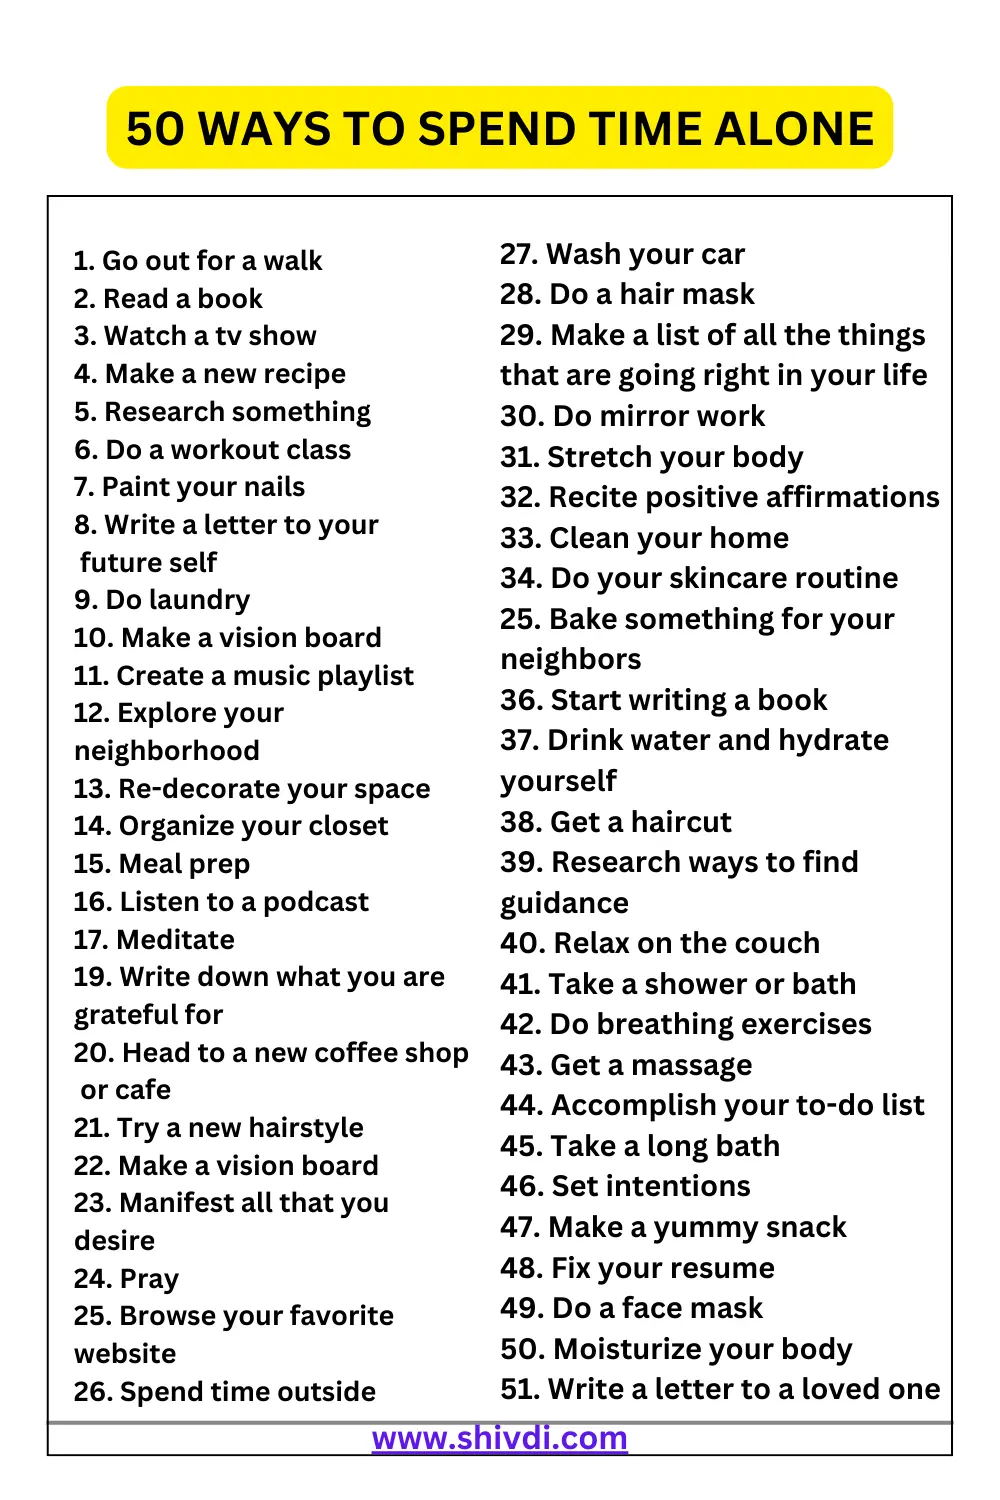 50 Ways to Spend Time Alone